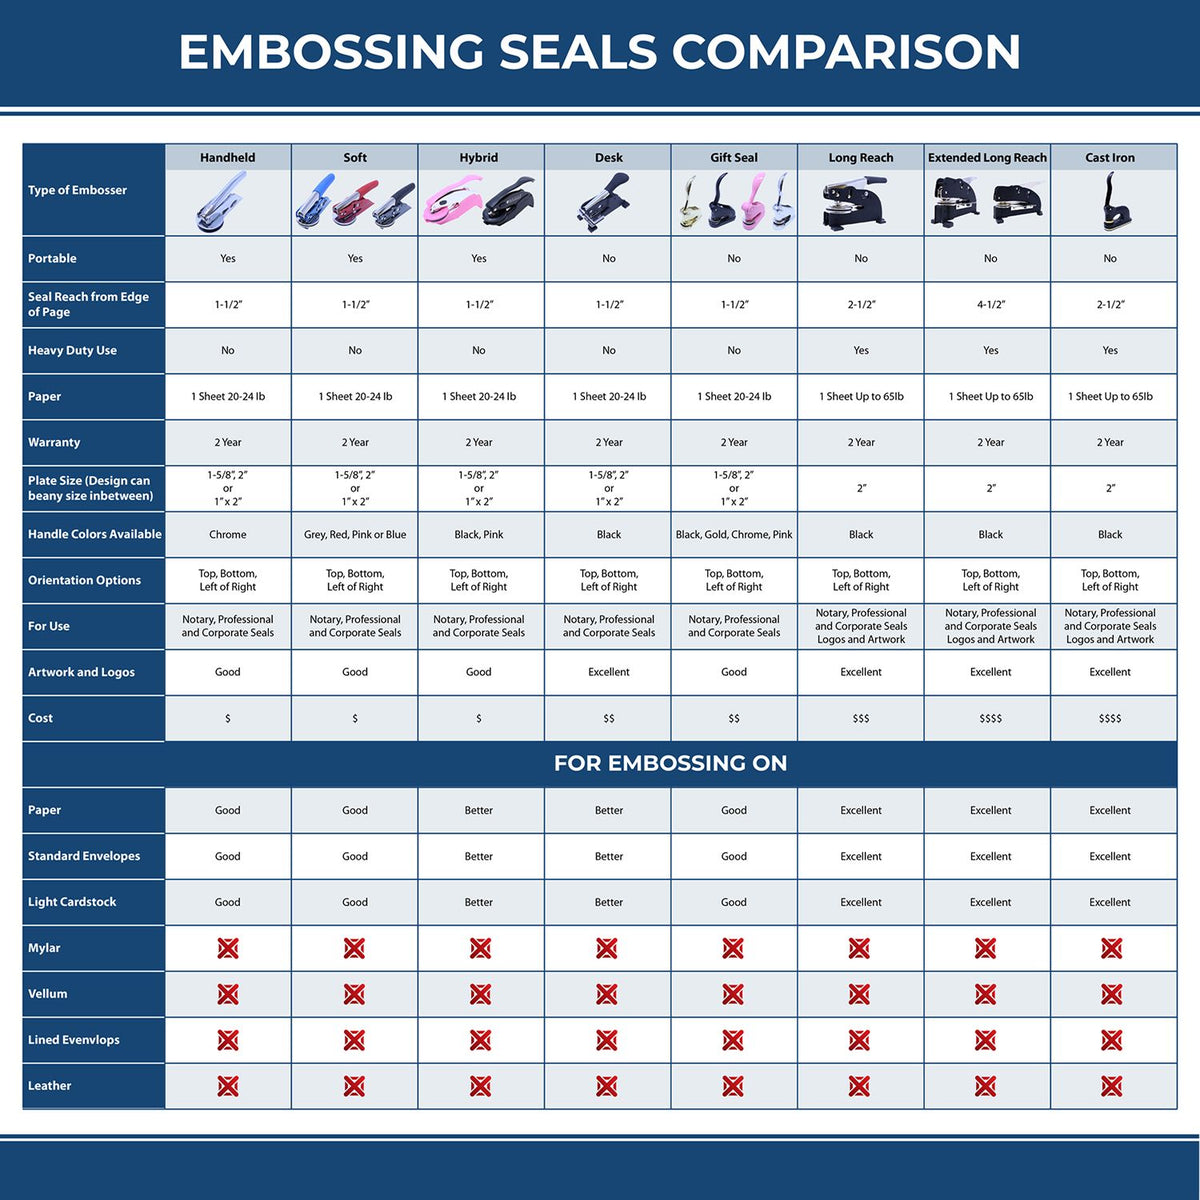 A comparison chart for the different types of mount models available for the State of Vermont Extended Long Reach Geologist Seal